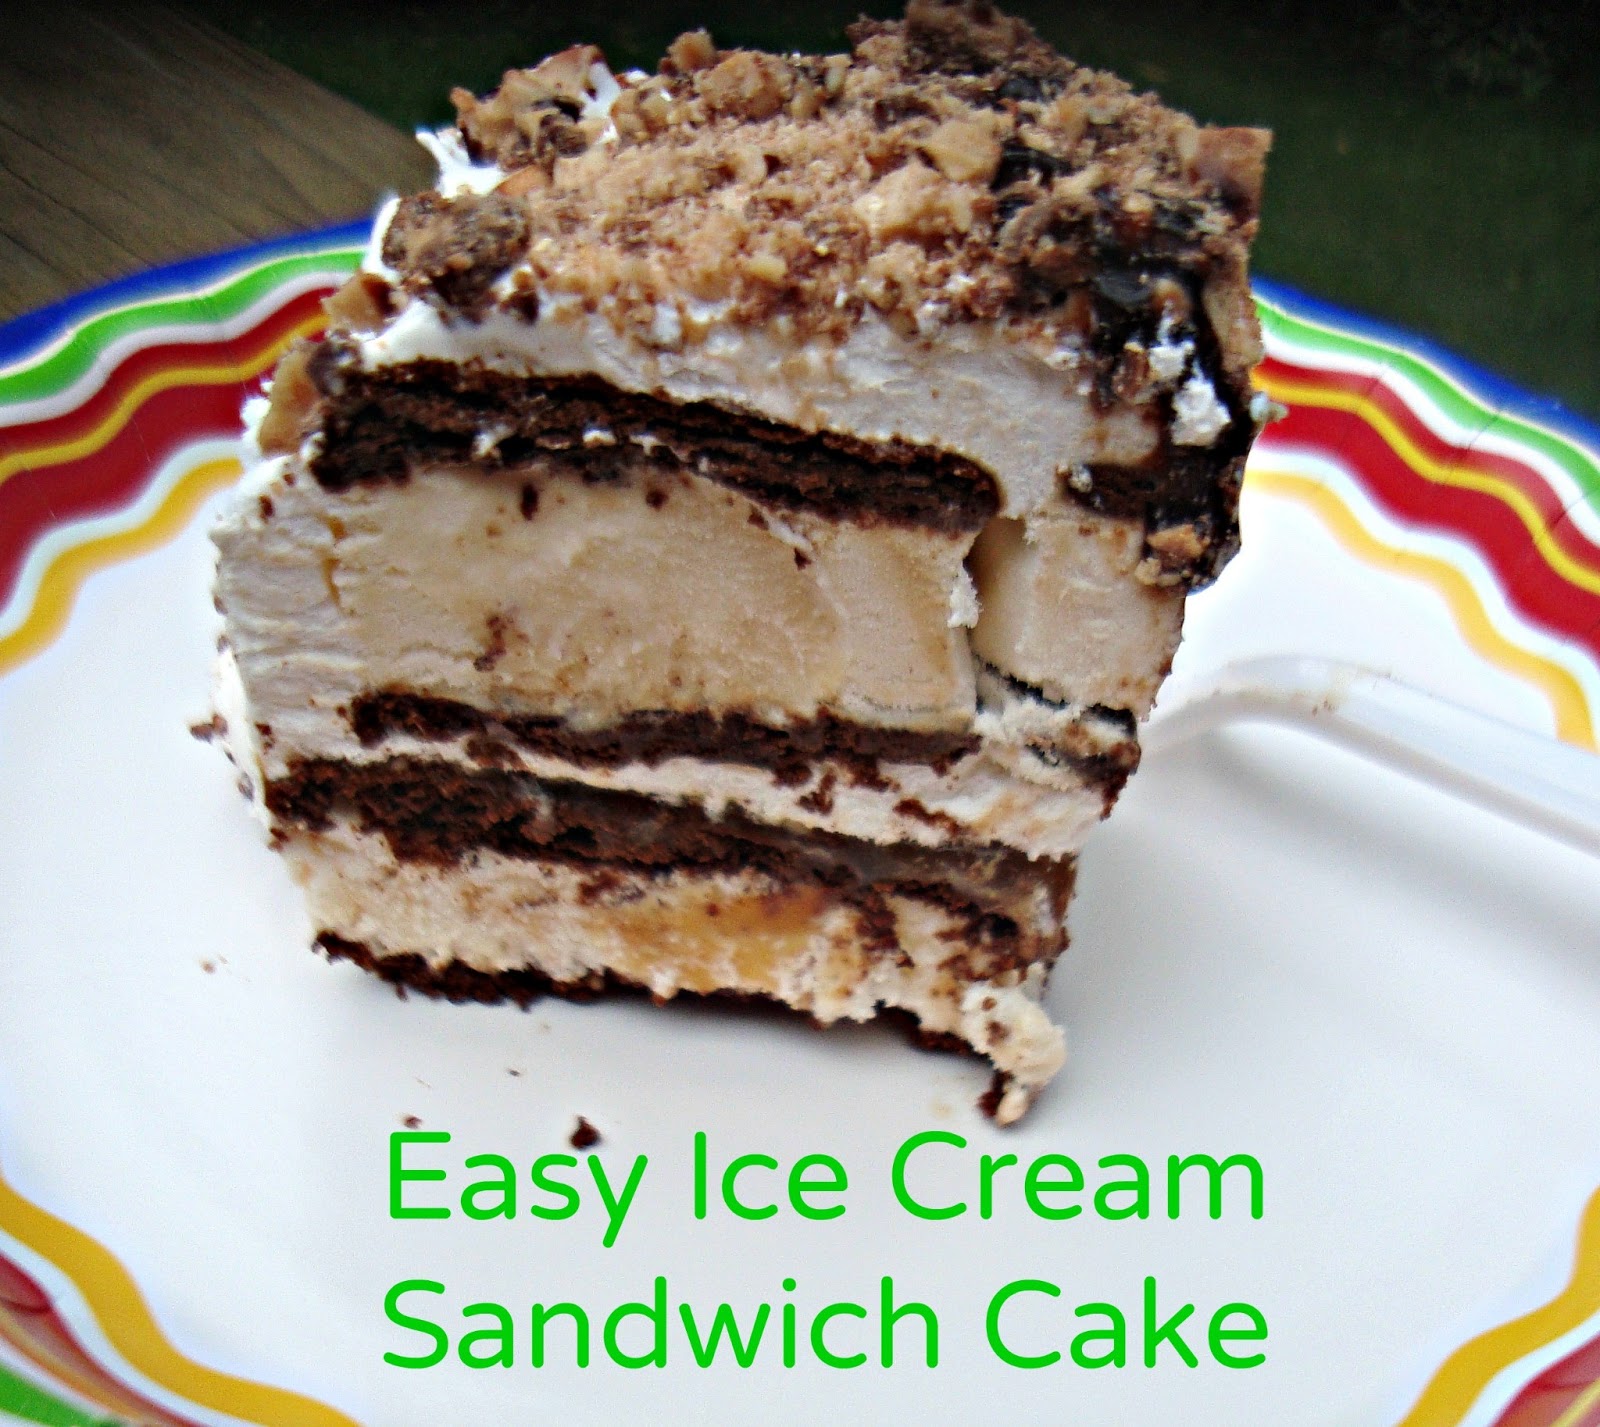 The Good, the Bad, and the Quirky: Easy Ice Cream Sandwich Cake